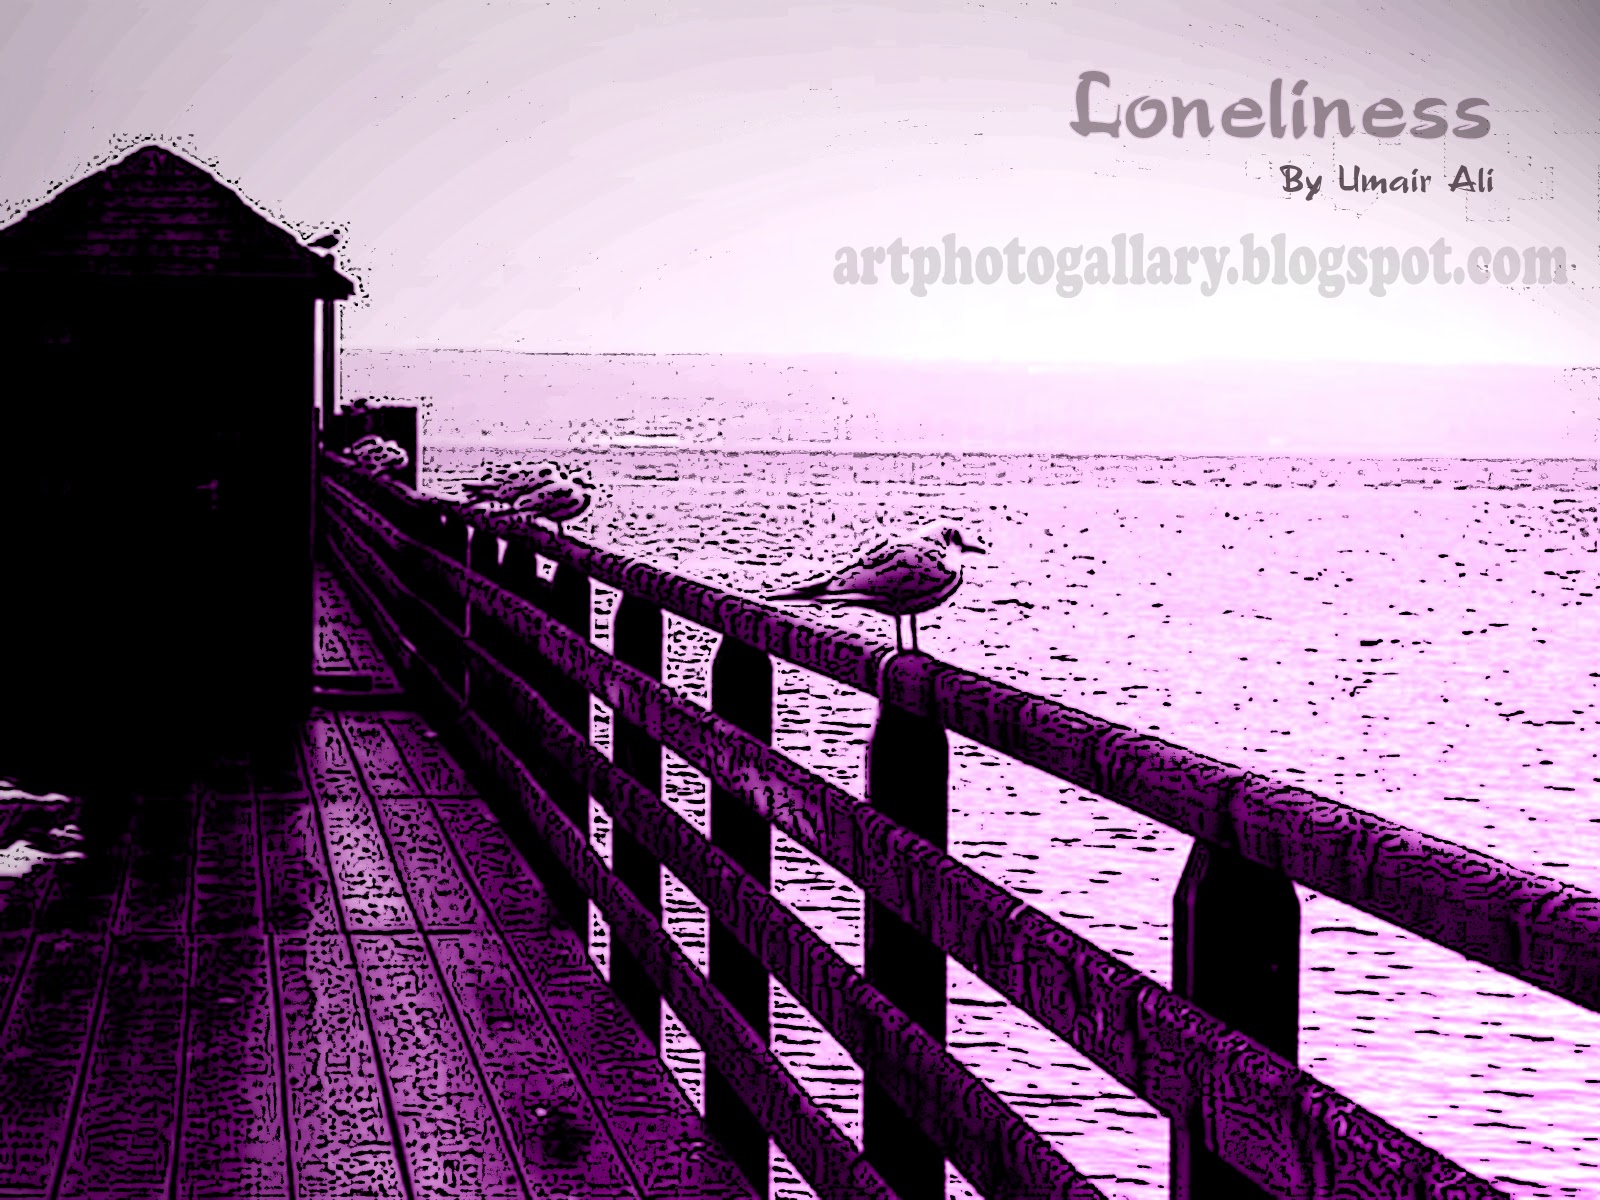 Lonely With Quotes Wallpaper PicsWallpapercom